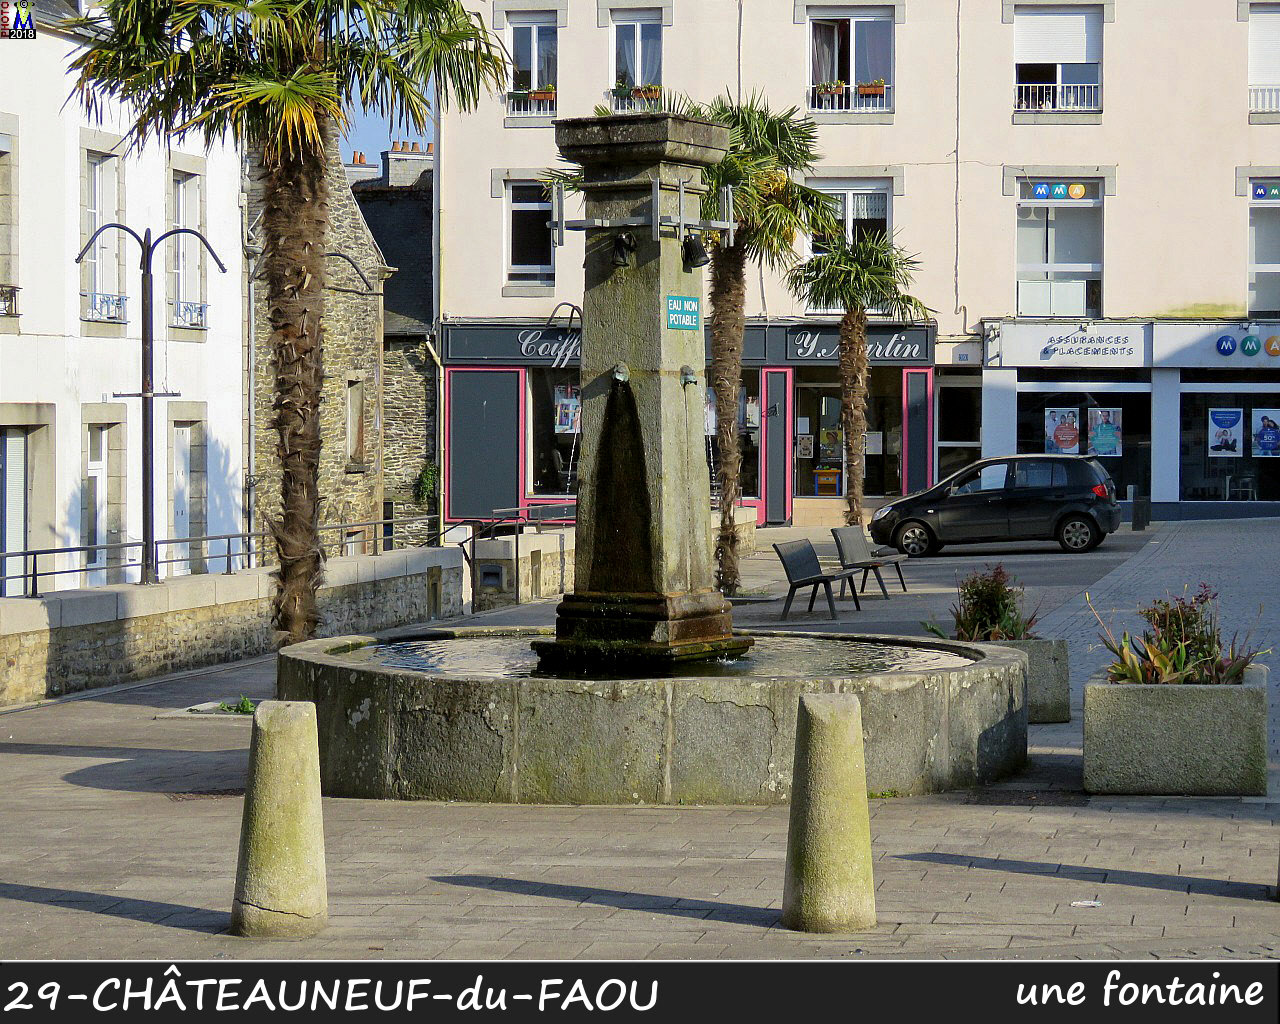 29CHATEAUNEUF-FAOU_fontaine_100.jpg